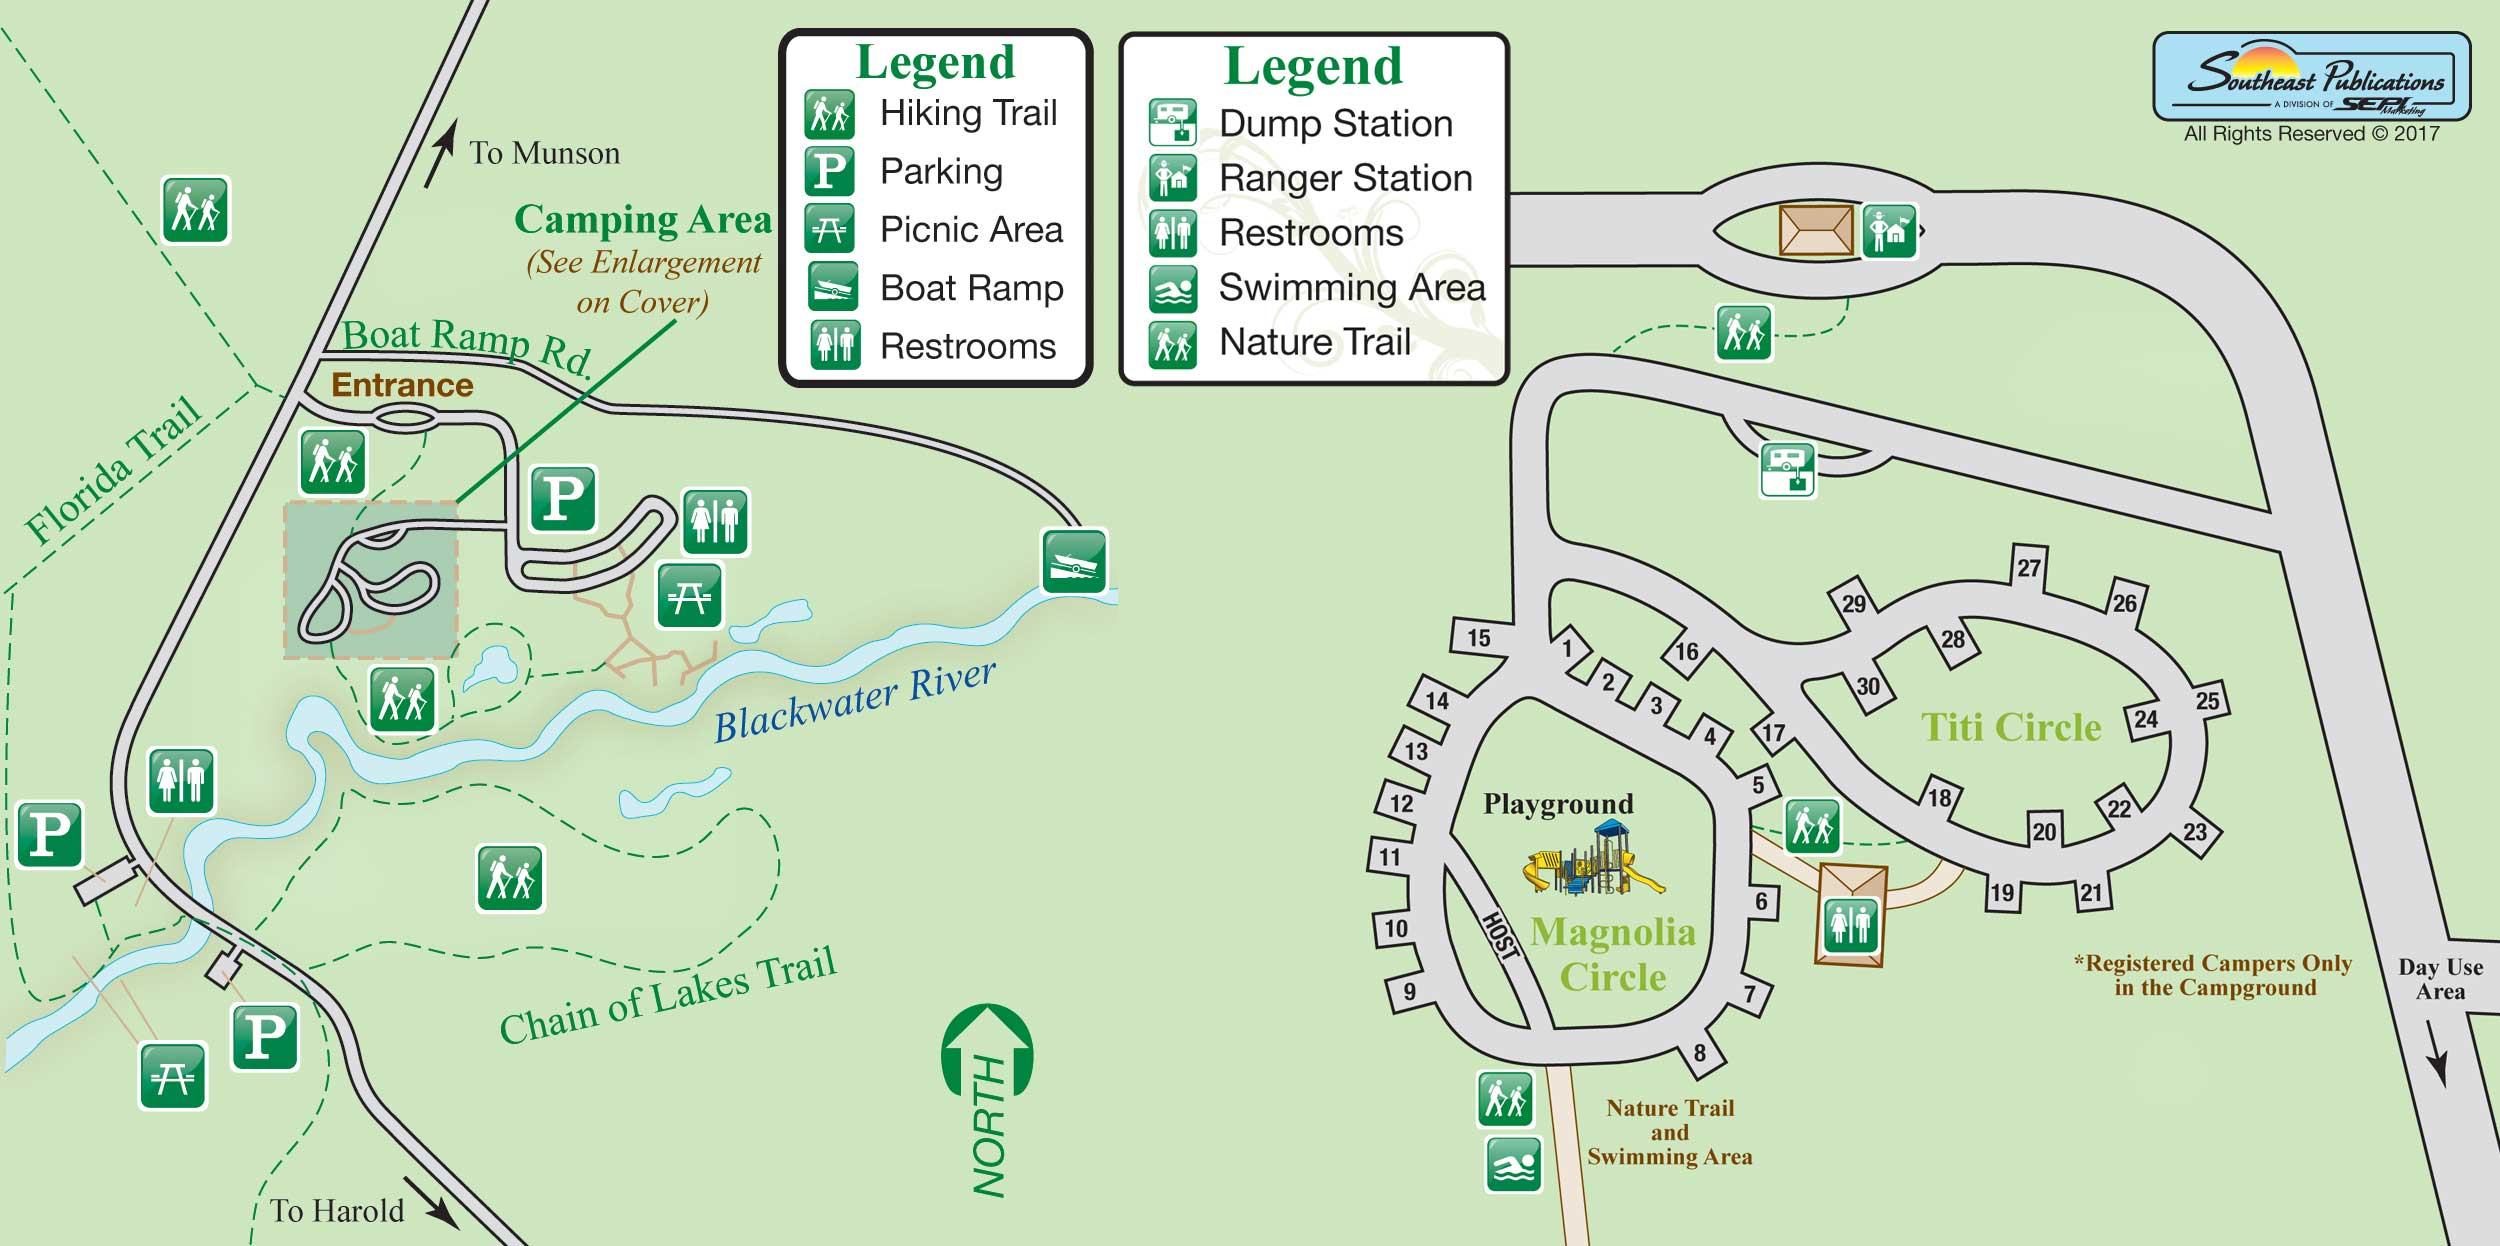 Florida State Parks Rv Camping - Know Your Campground - Camping In Florida State Parks Map